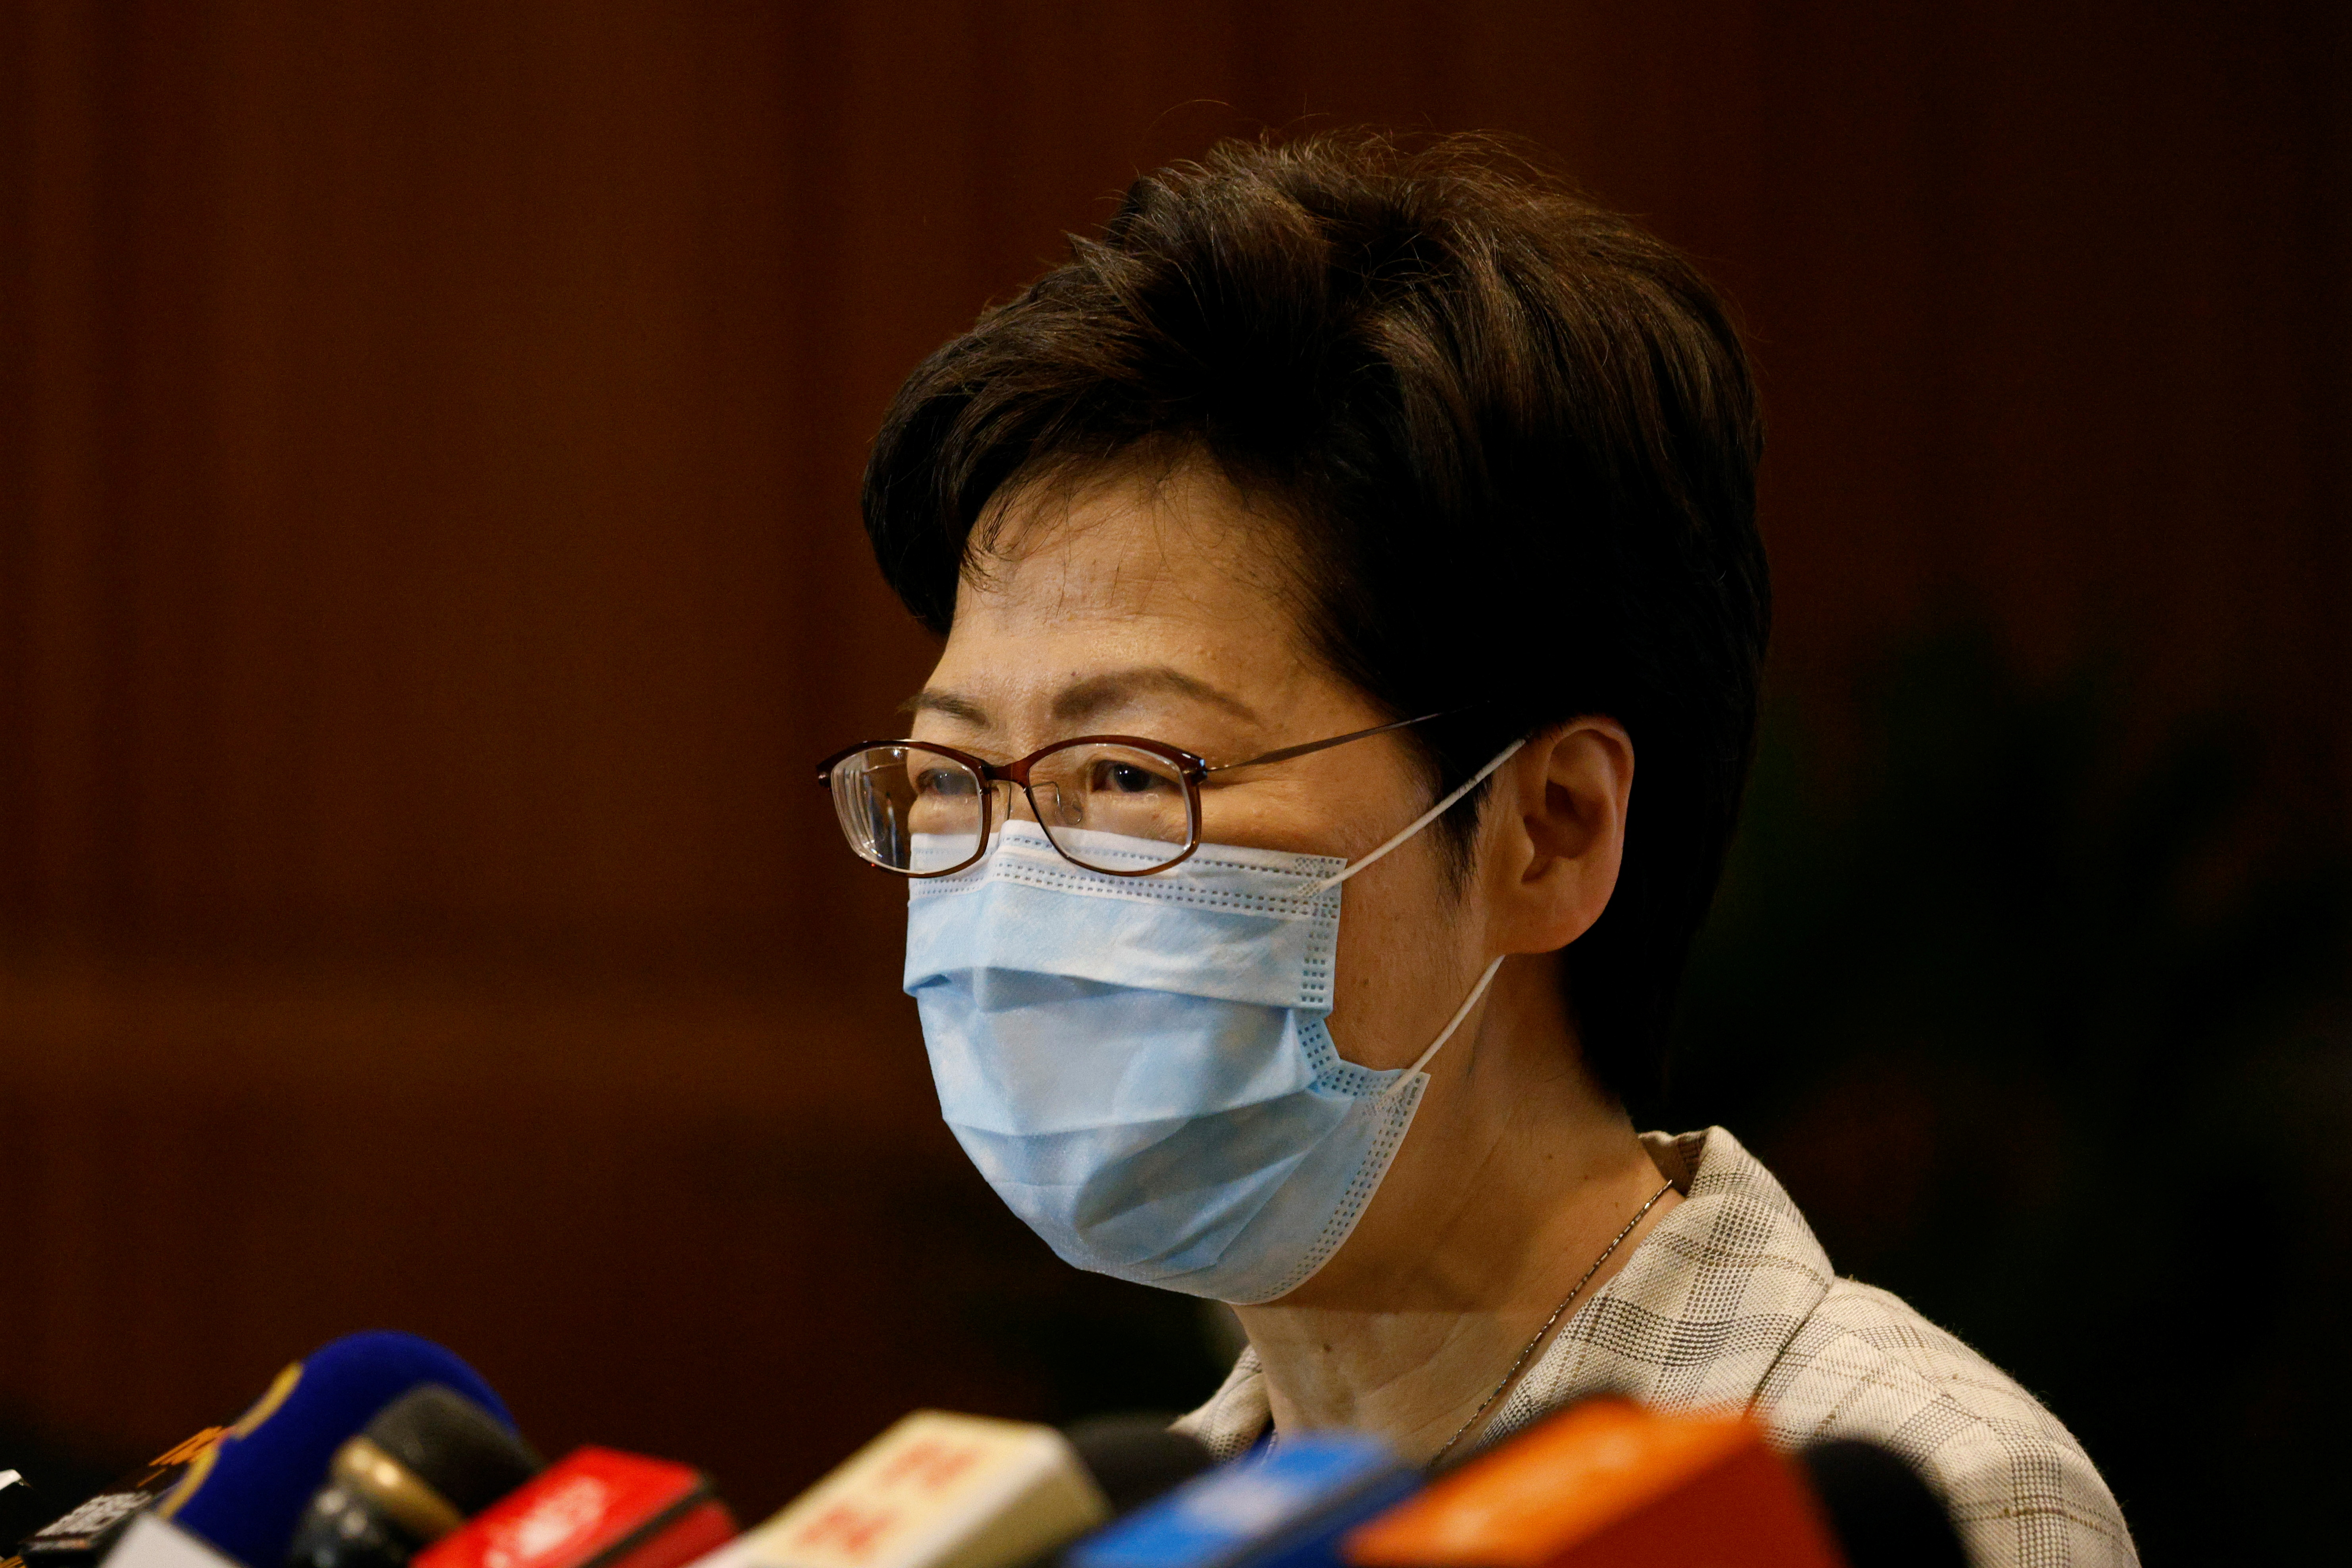 Hong Kong Chief Executive Carrie Lam speaks to media at polling station during voting of the election committee, in Hong Kong